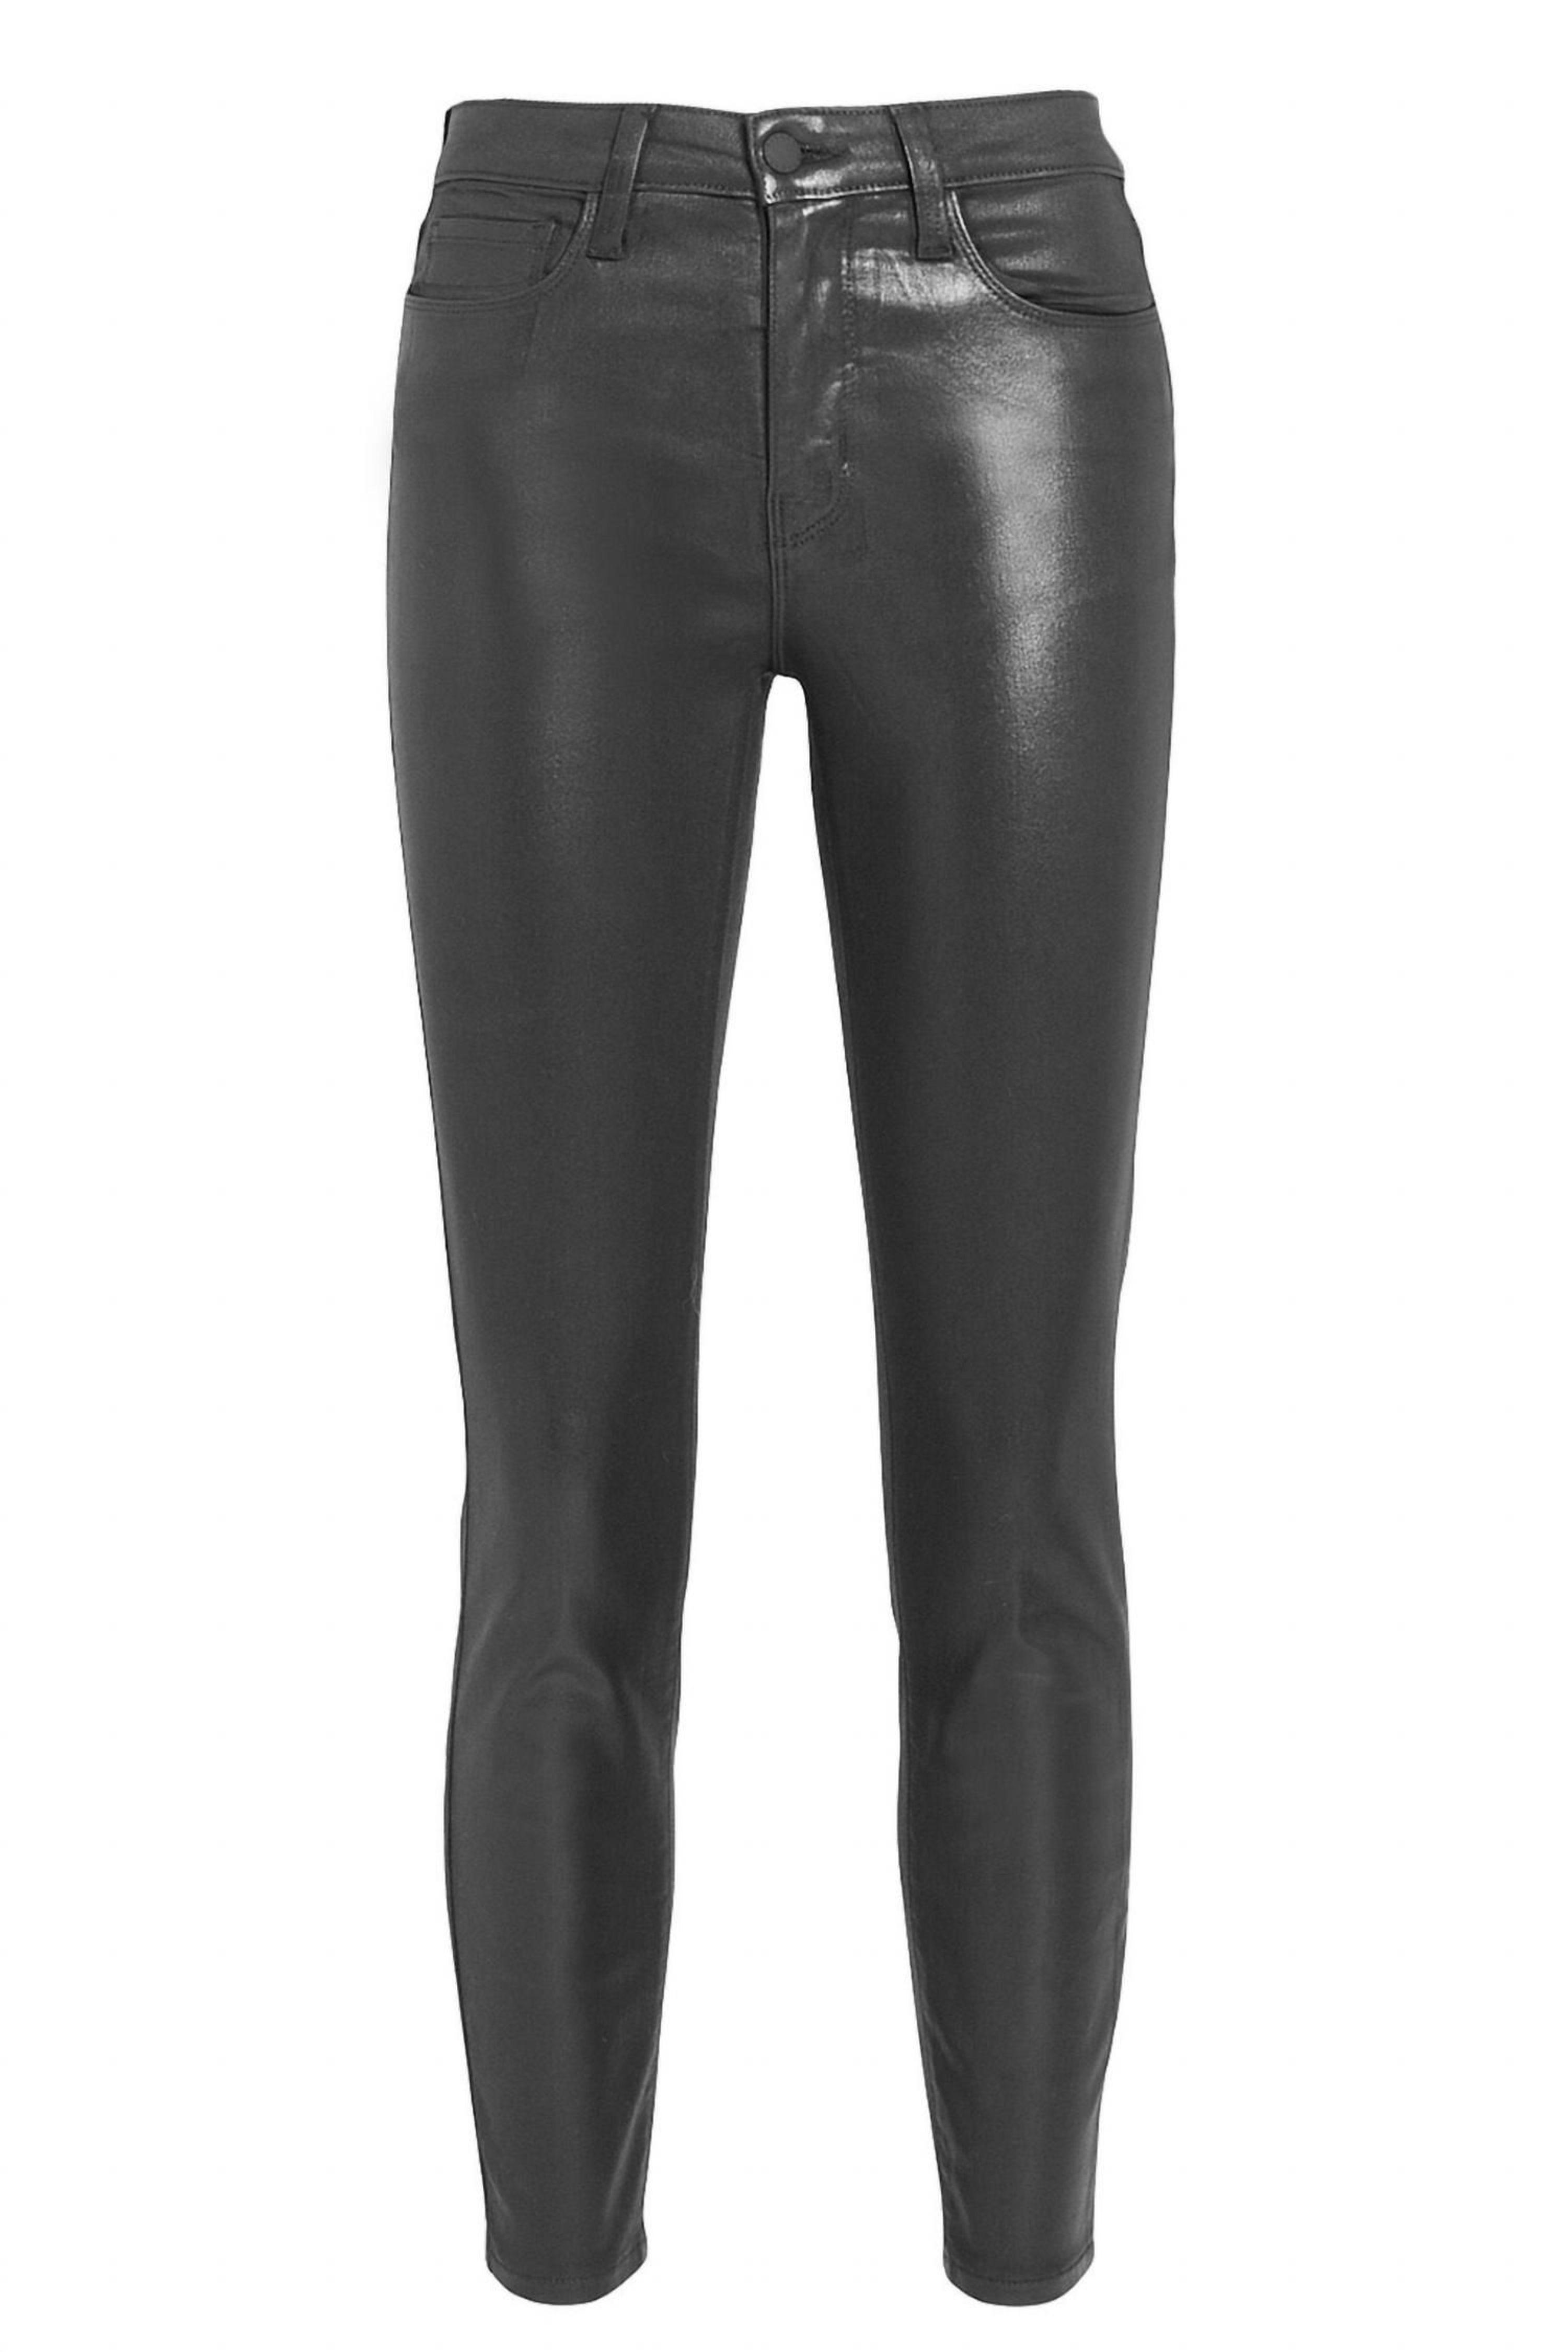 L'Agence Adelaide Skinny Leather Pant in Black